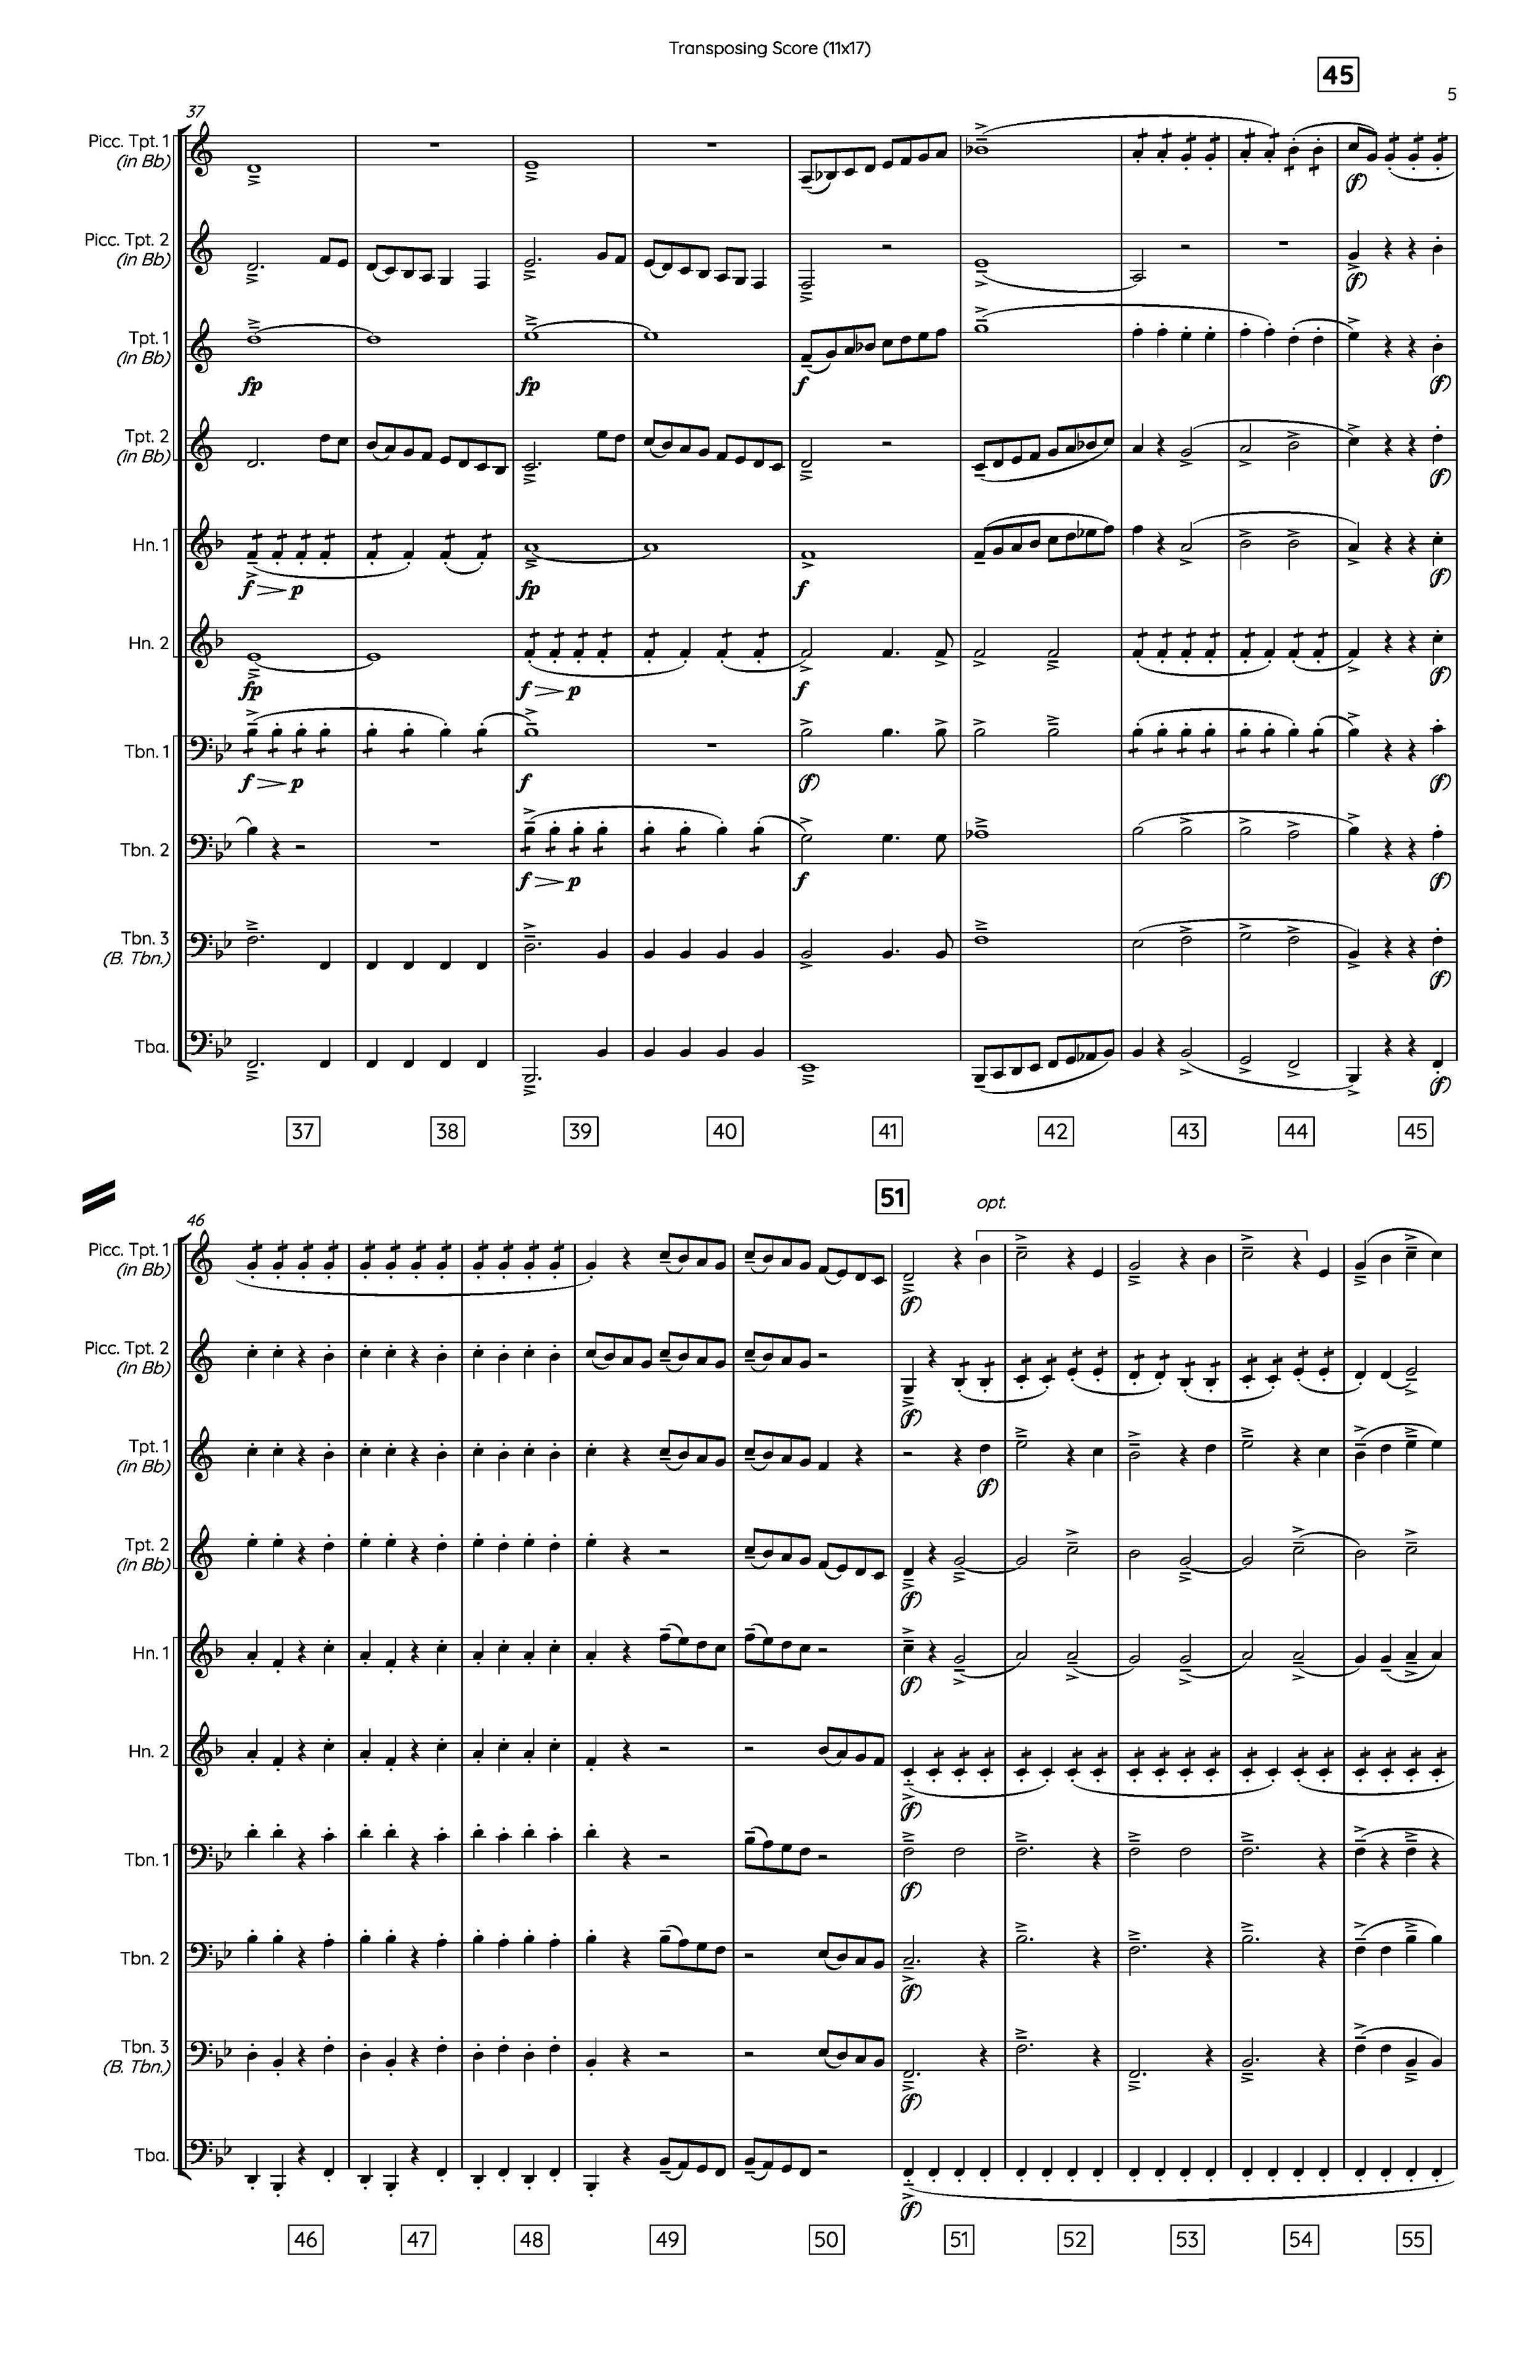 Marriage of Figaro [Brass Ensemble] in Bb - Score 11x17_Page_05.jpg